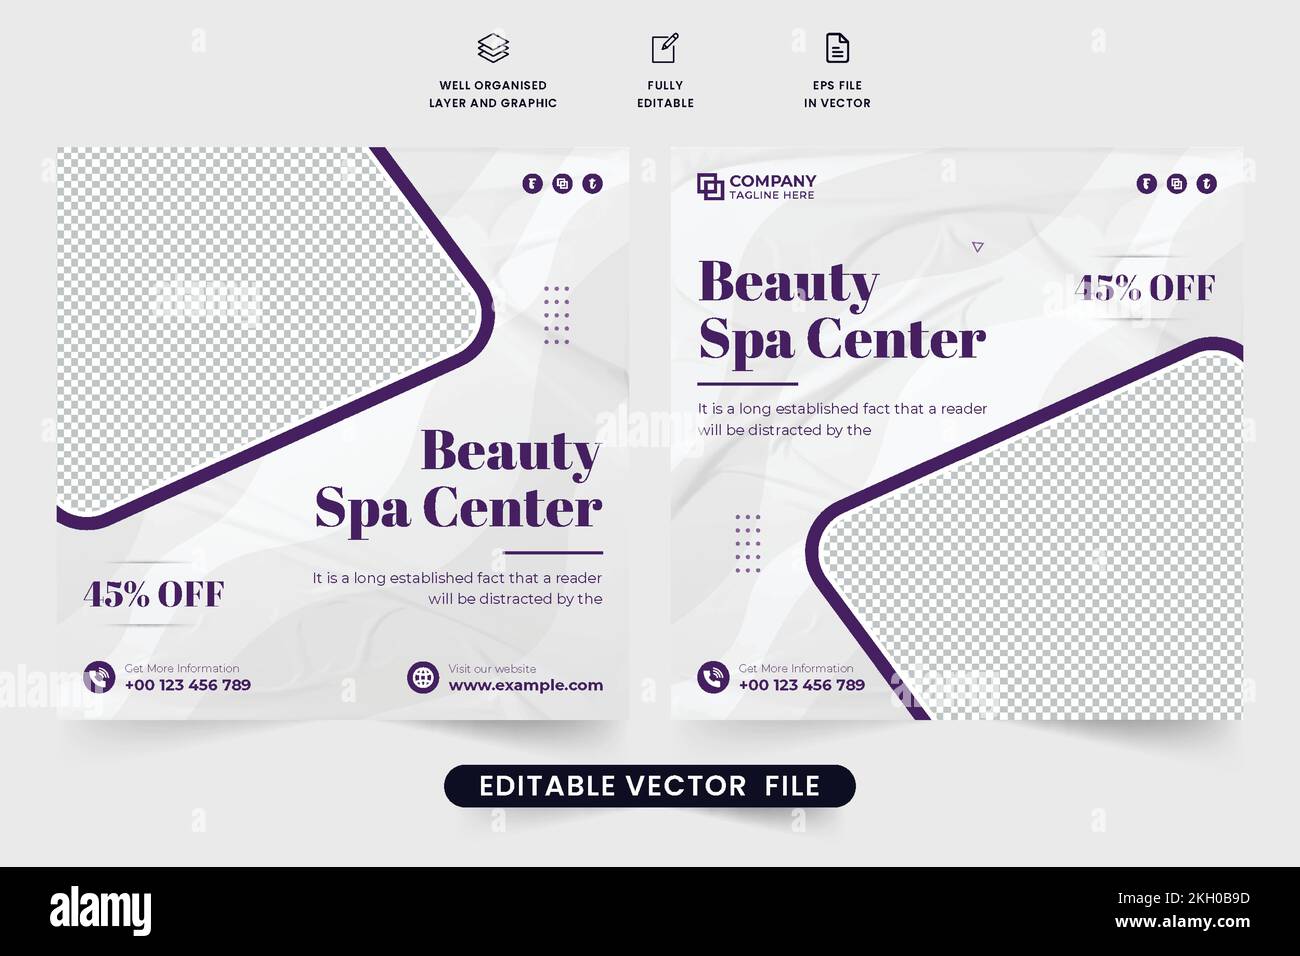 Special beauty treatment social media post design with navy blue colors. Spa and beauty salon poster vector with photo placeholders. Spa center advert Stock Vector